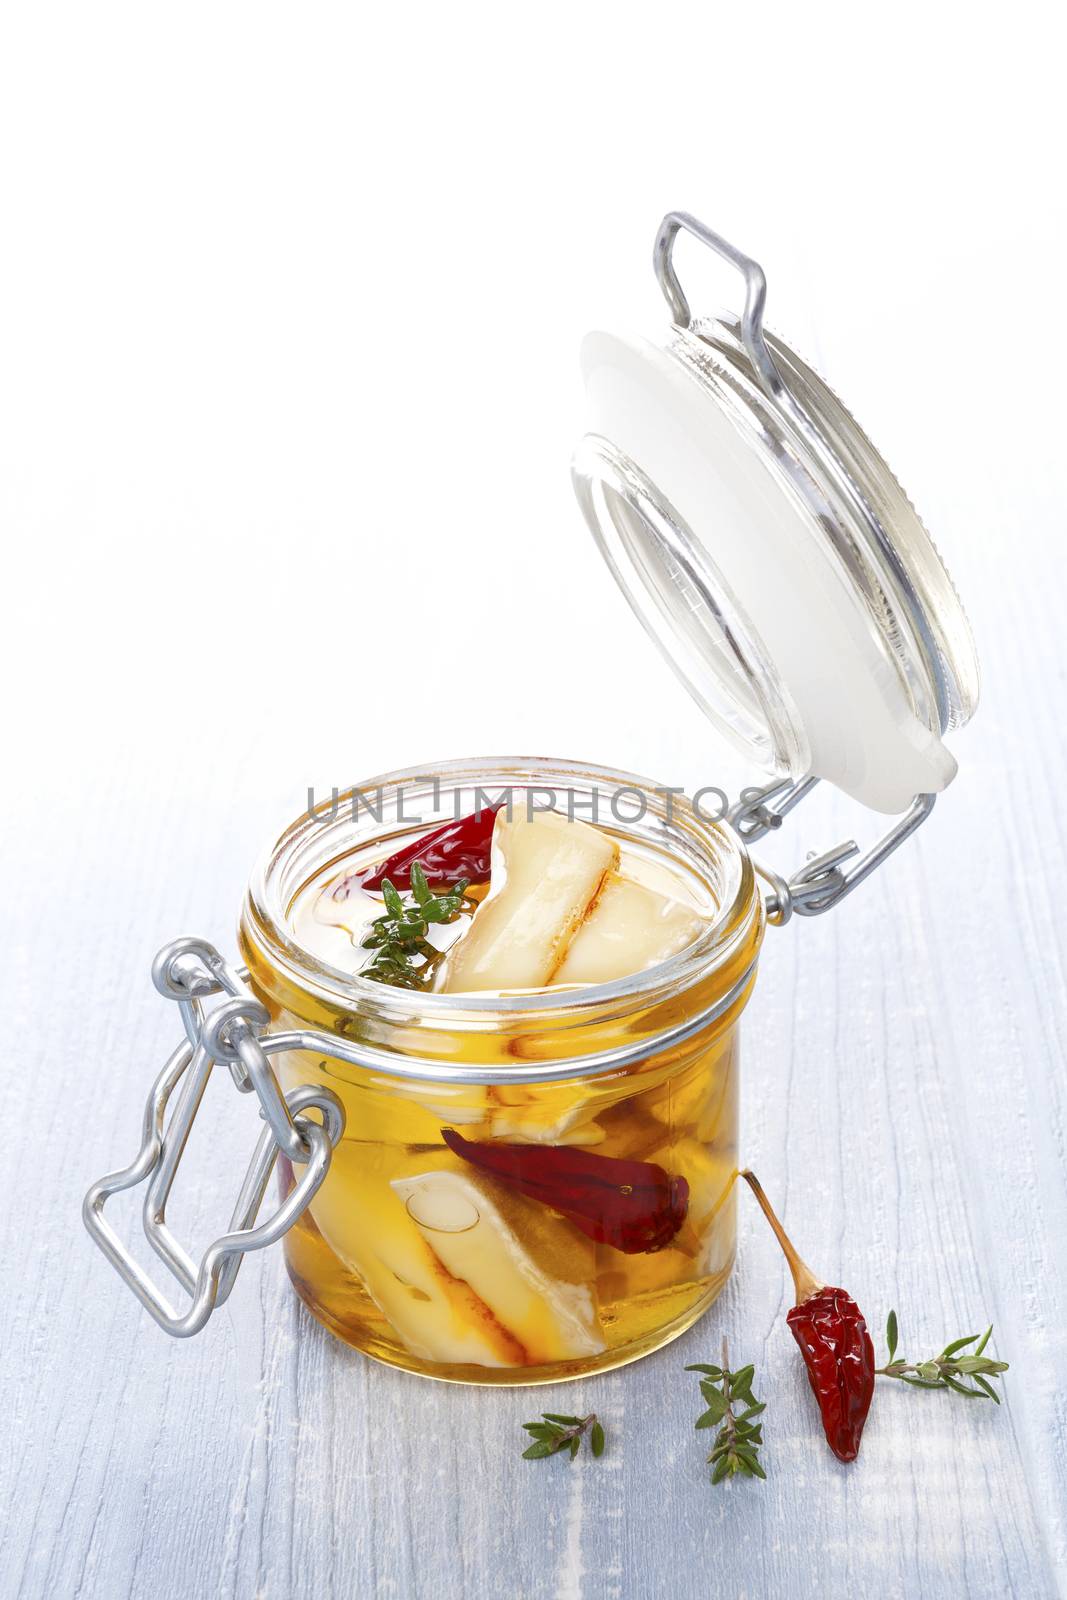 Marinated cheese in glass jar. by eskymaks